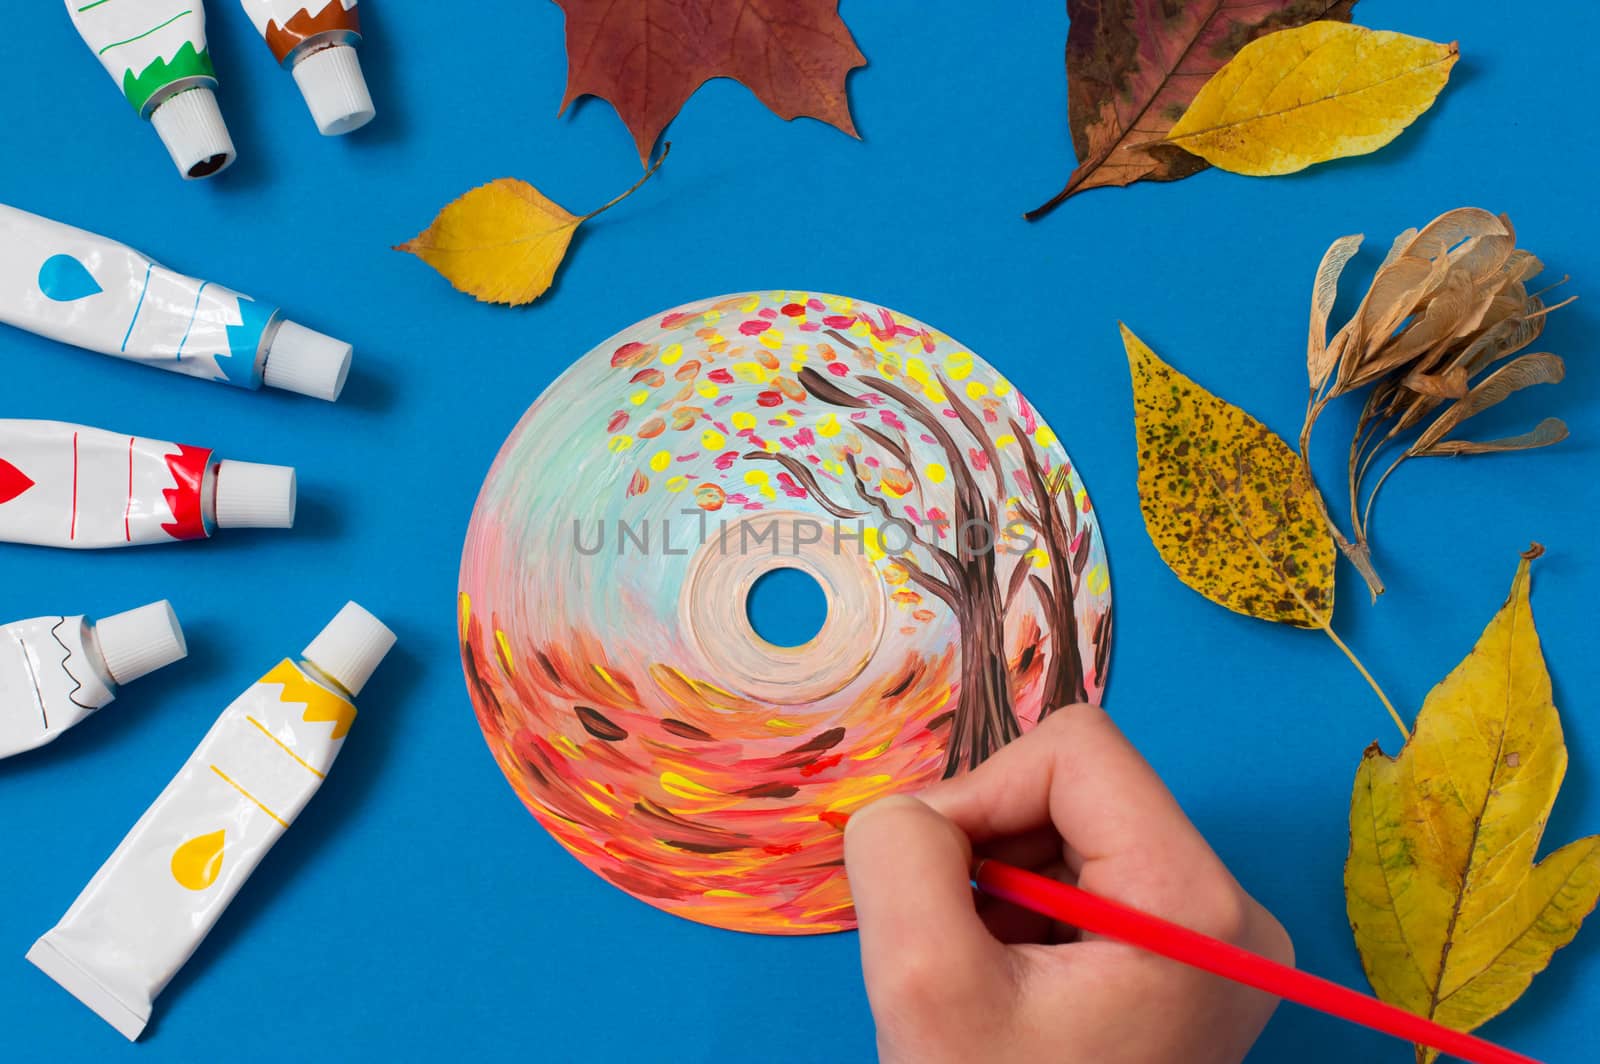 Painting with acrylics paints on CD. Seasons. Autumn landscape. Creative art project 